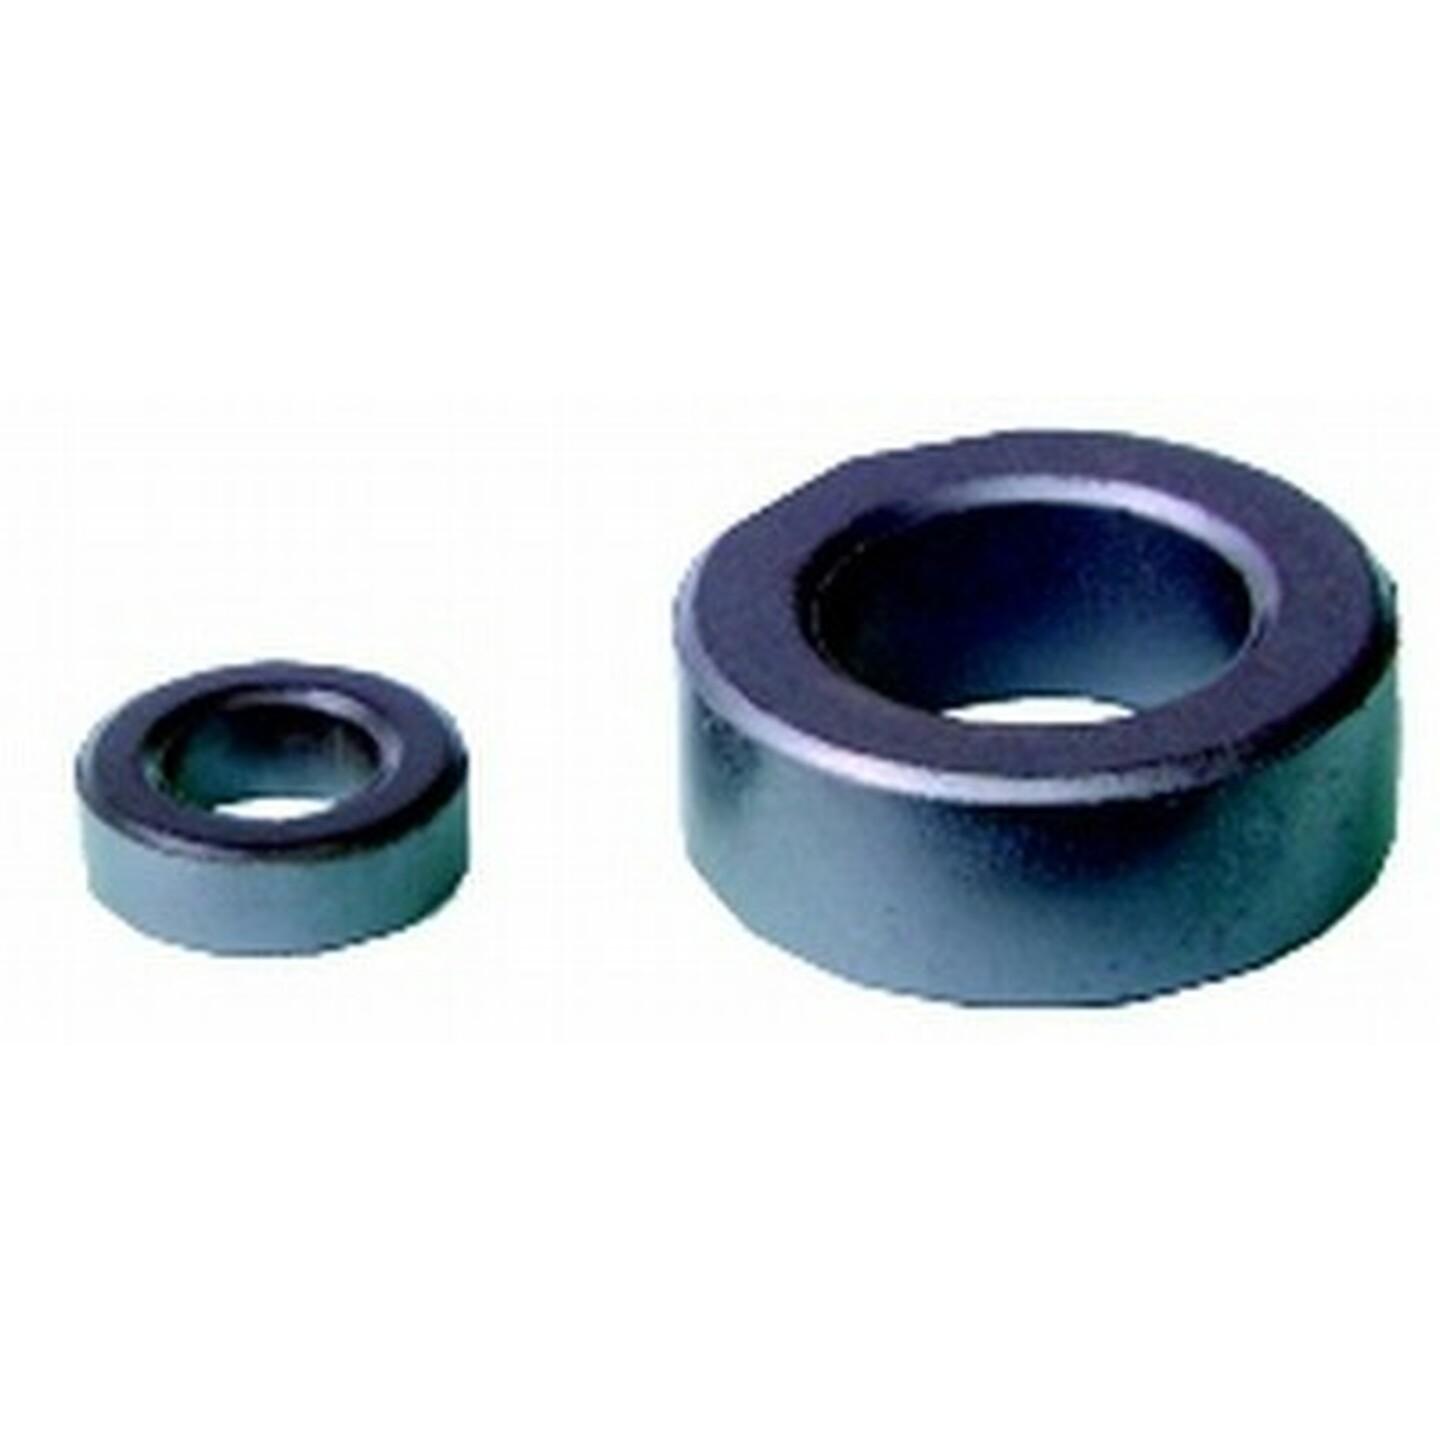 L8 25x15x10mm Toroid or Ring Cores - Pack of 4